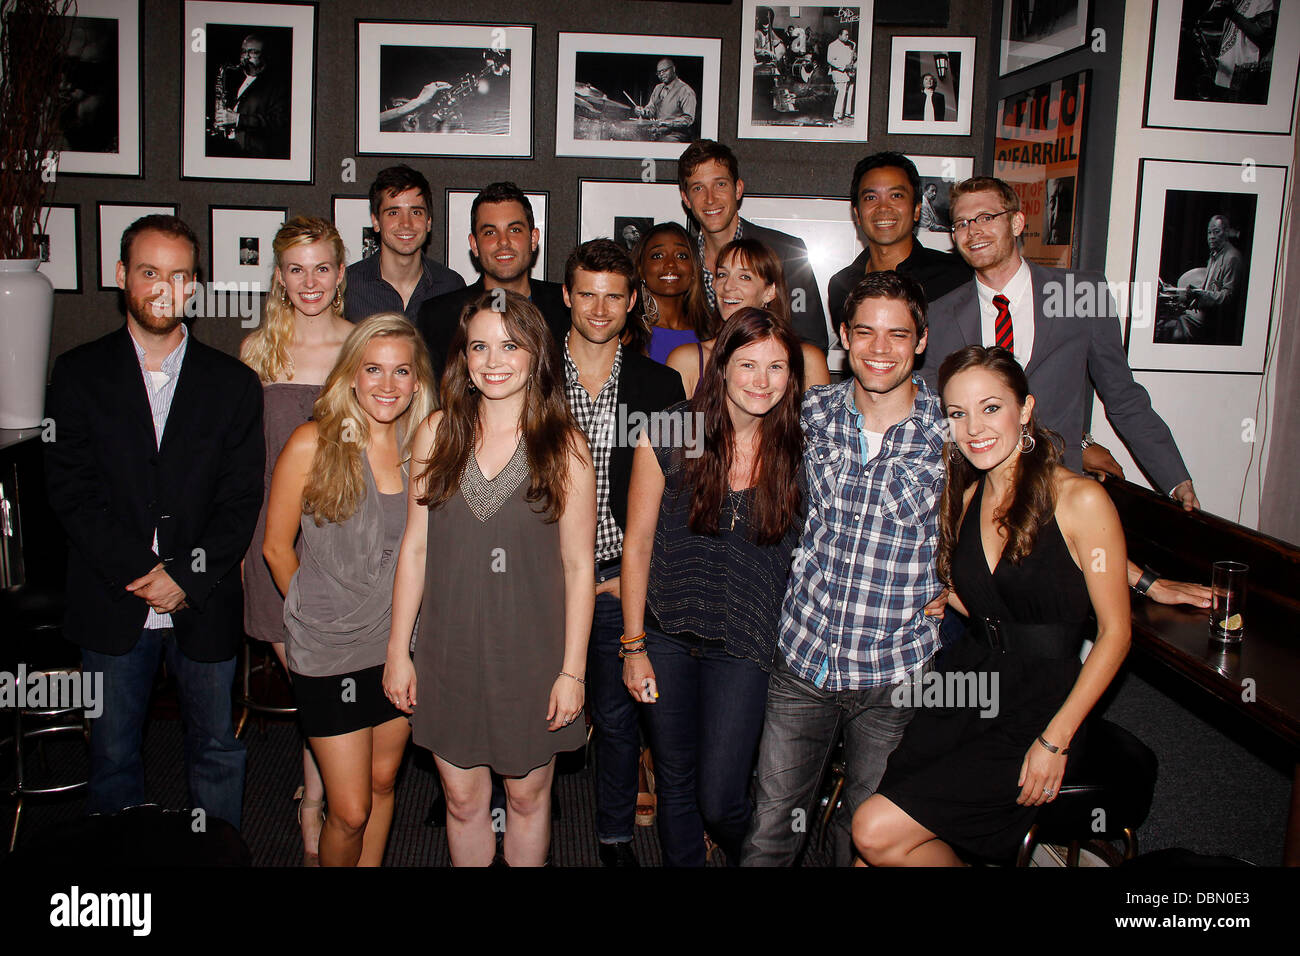 Back row: Christopher Dimond, Kate Hennies, Matt Doyle, Zak Resnick, Kyle Dean Massey, Patina Miller, Anderson Davis, Julia Murney, Jose Llana, and Michael Kooman  Front Row: Lora Lee Gayer, Phoebe Strole, Allison Case, Jeremy Jordan, and Laura Osnes  Broadway at Birdland concert / CD Release: 'Out of Our Heads - The Music of Kooman and Dimond' at Birdland Jazz Club - After Party.  Stock Photo